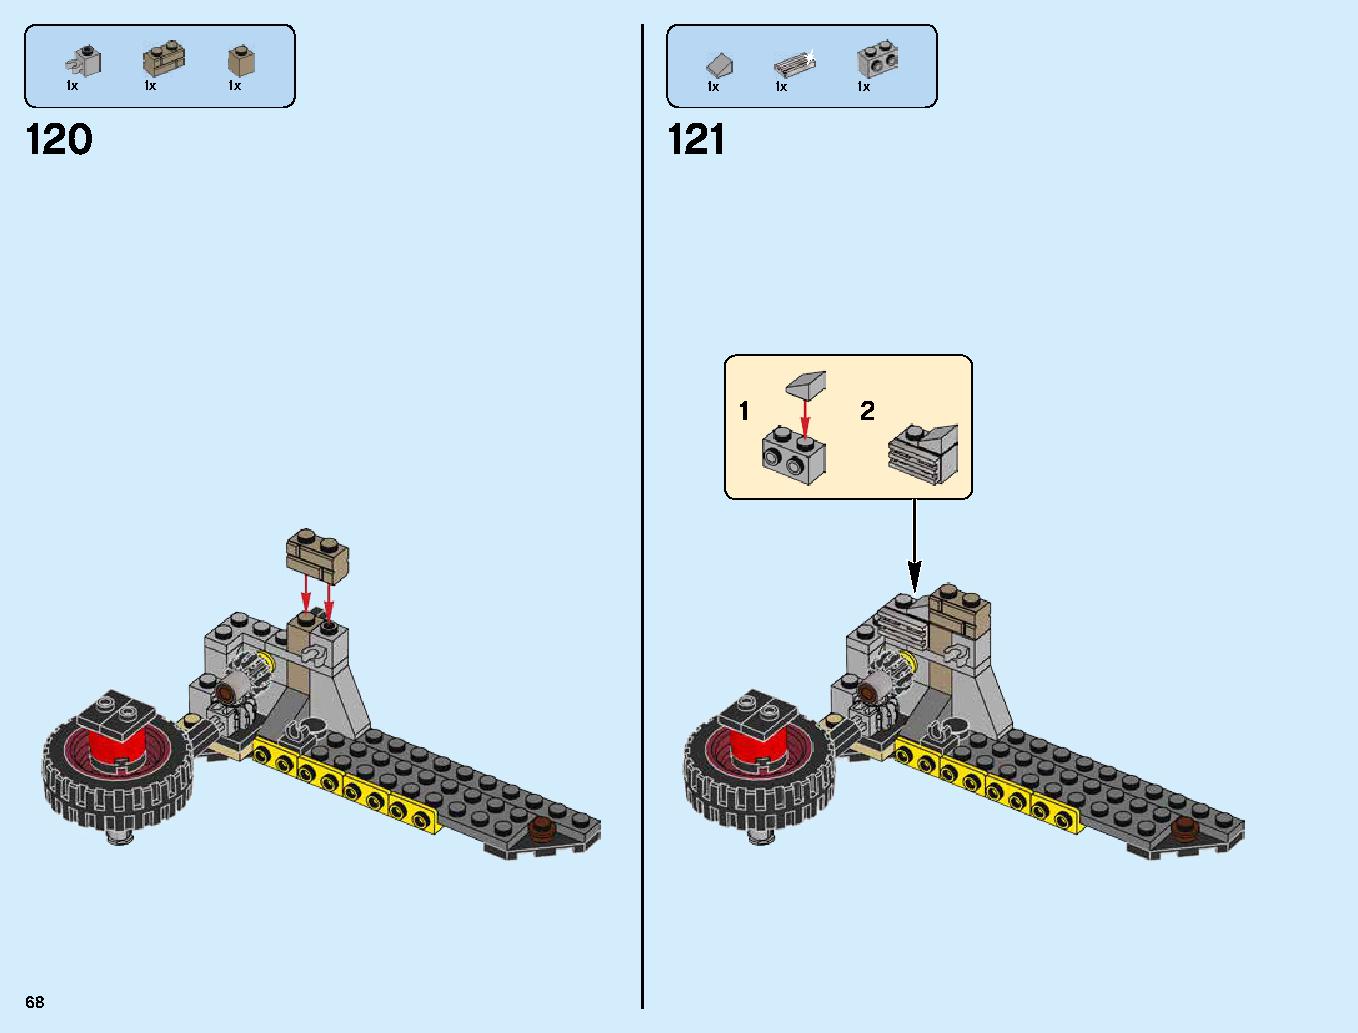 S.O.G. Headquarters 70640 LEGO information LEGO instructions 68 page